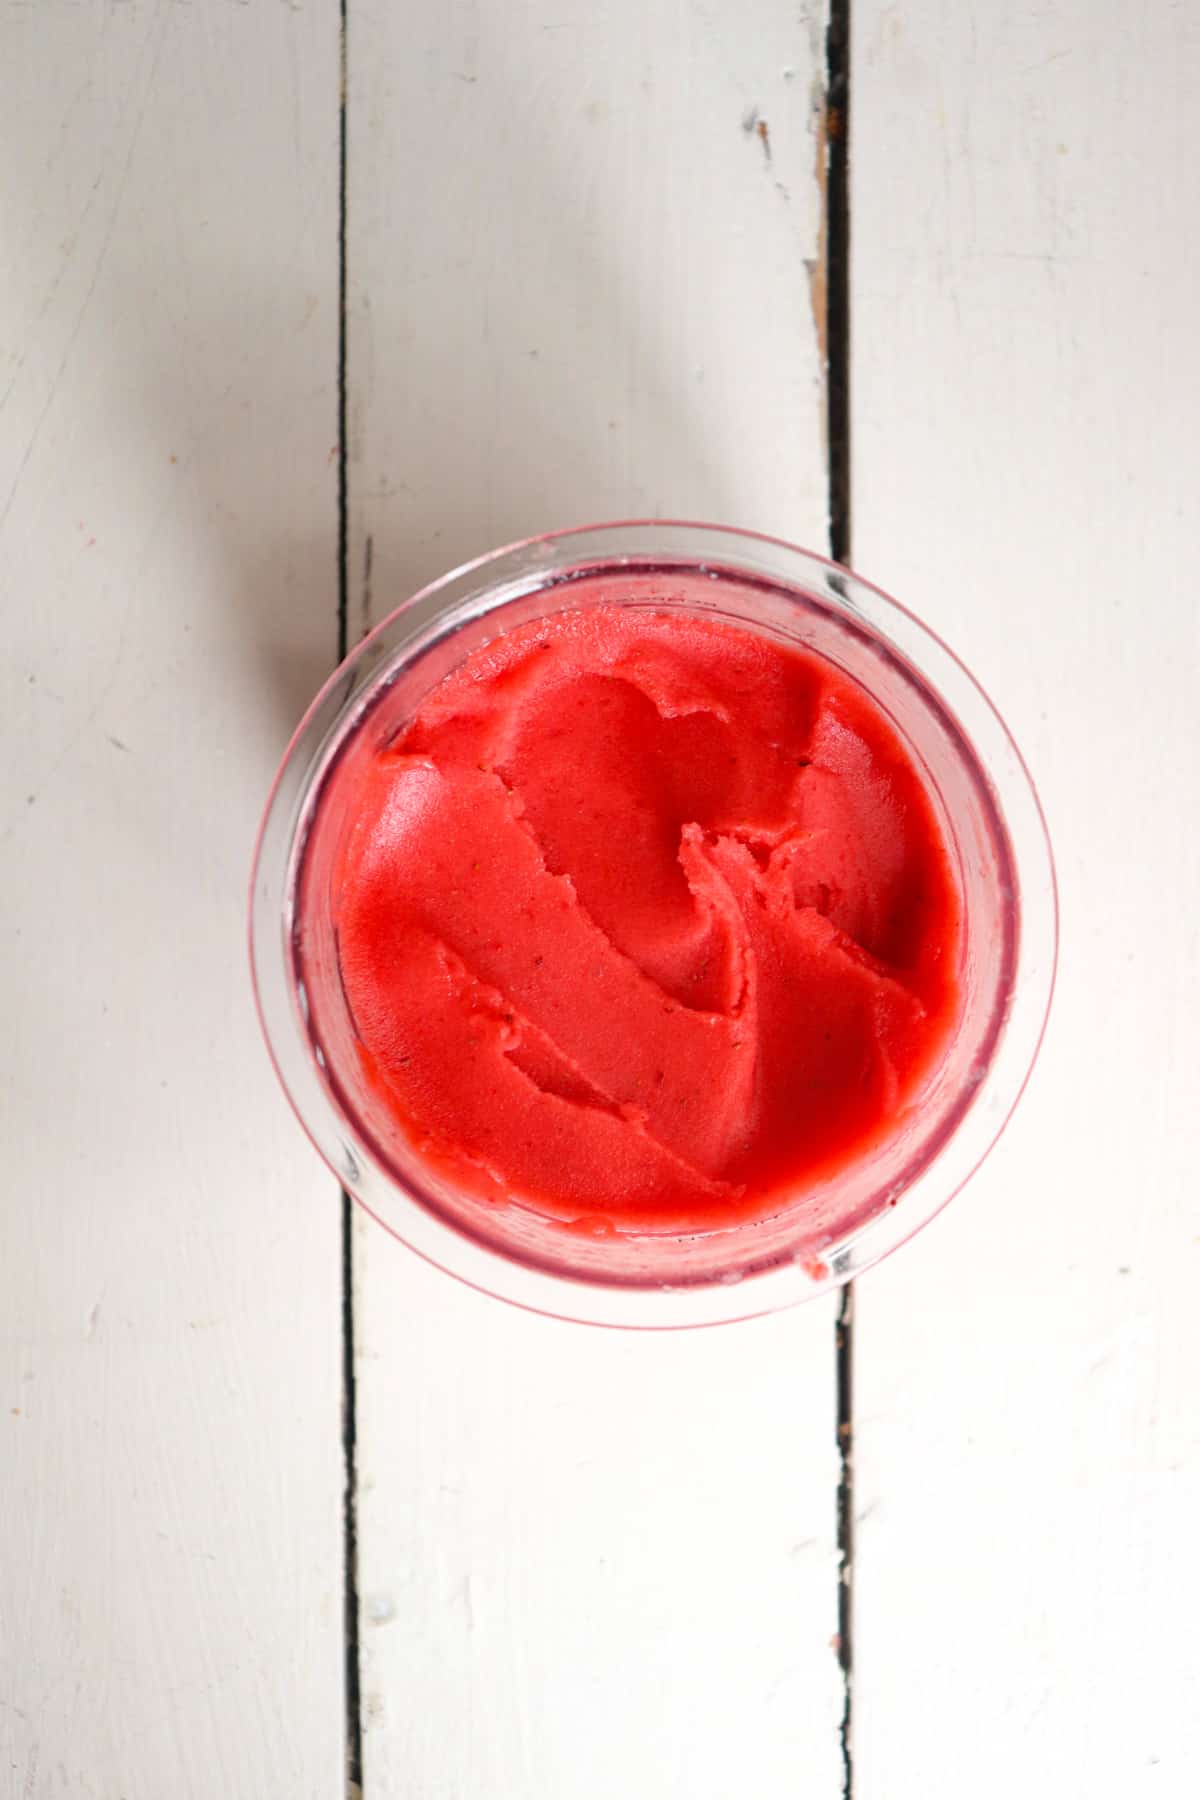 finished sorbet in pint container.